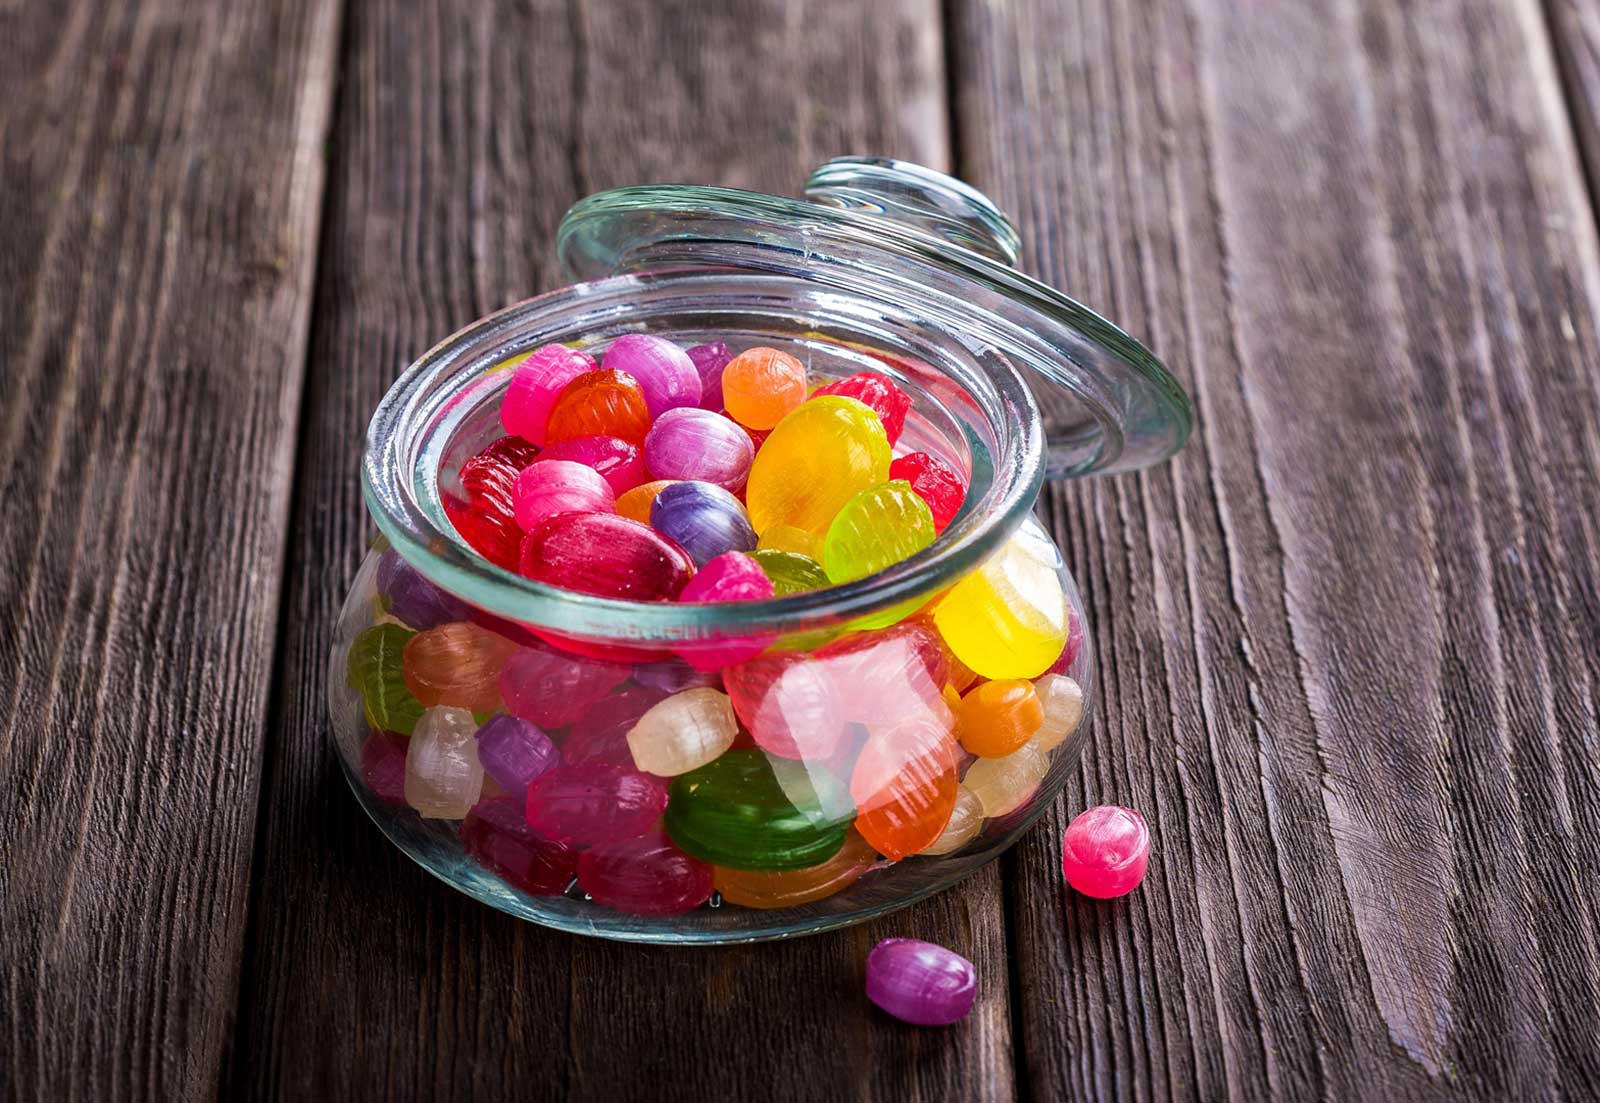 Only a Person Older Than 65 Will Like at Least 13/25 of These Foods Hard candies